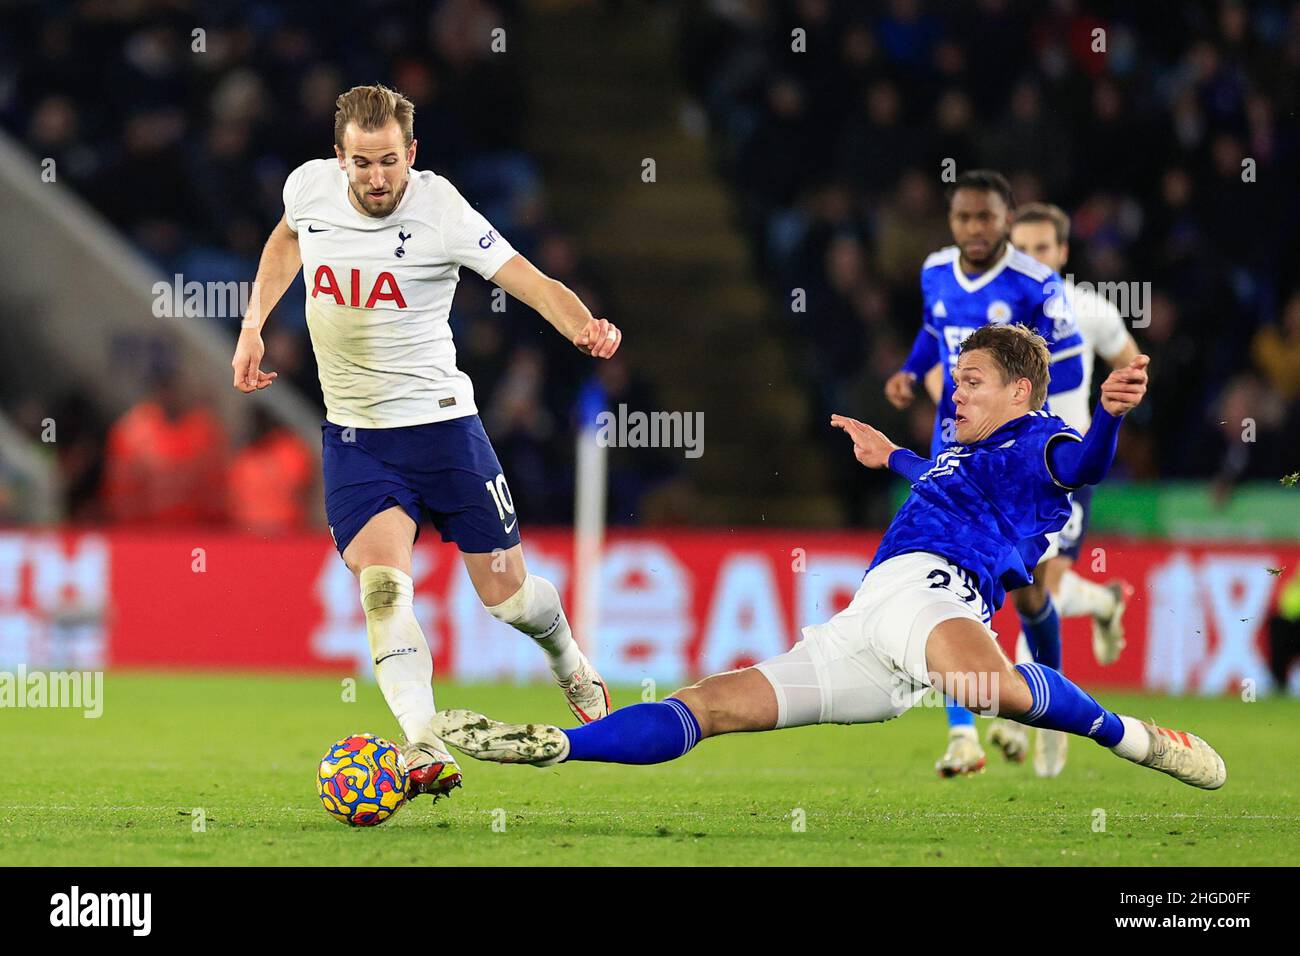 Leicester, UK. 19th Jan, 2022. Harry Kane #10 of Tottenham Hotspur is tackled by Jannik Vestergaard #23 of Leicester City in Leicester, United Kingdom on 1/19/2022. (Photo by Conor Molloy/News Images/Sipa USA) Credit: Sipa USA/Alamy Live News Stock Photo